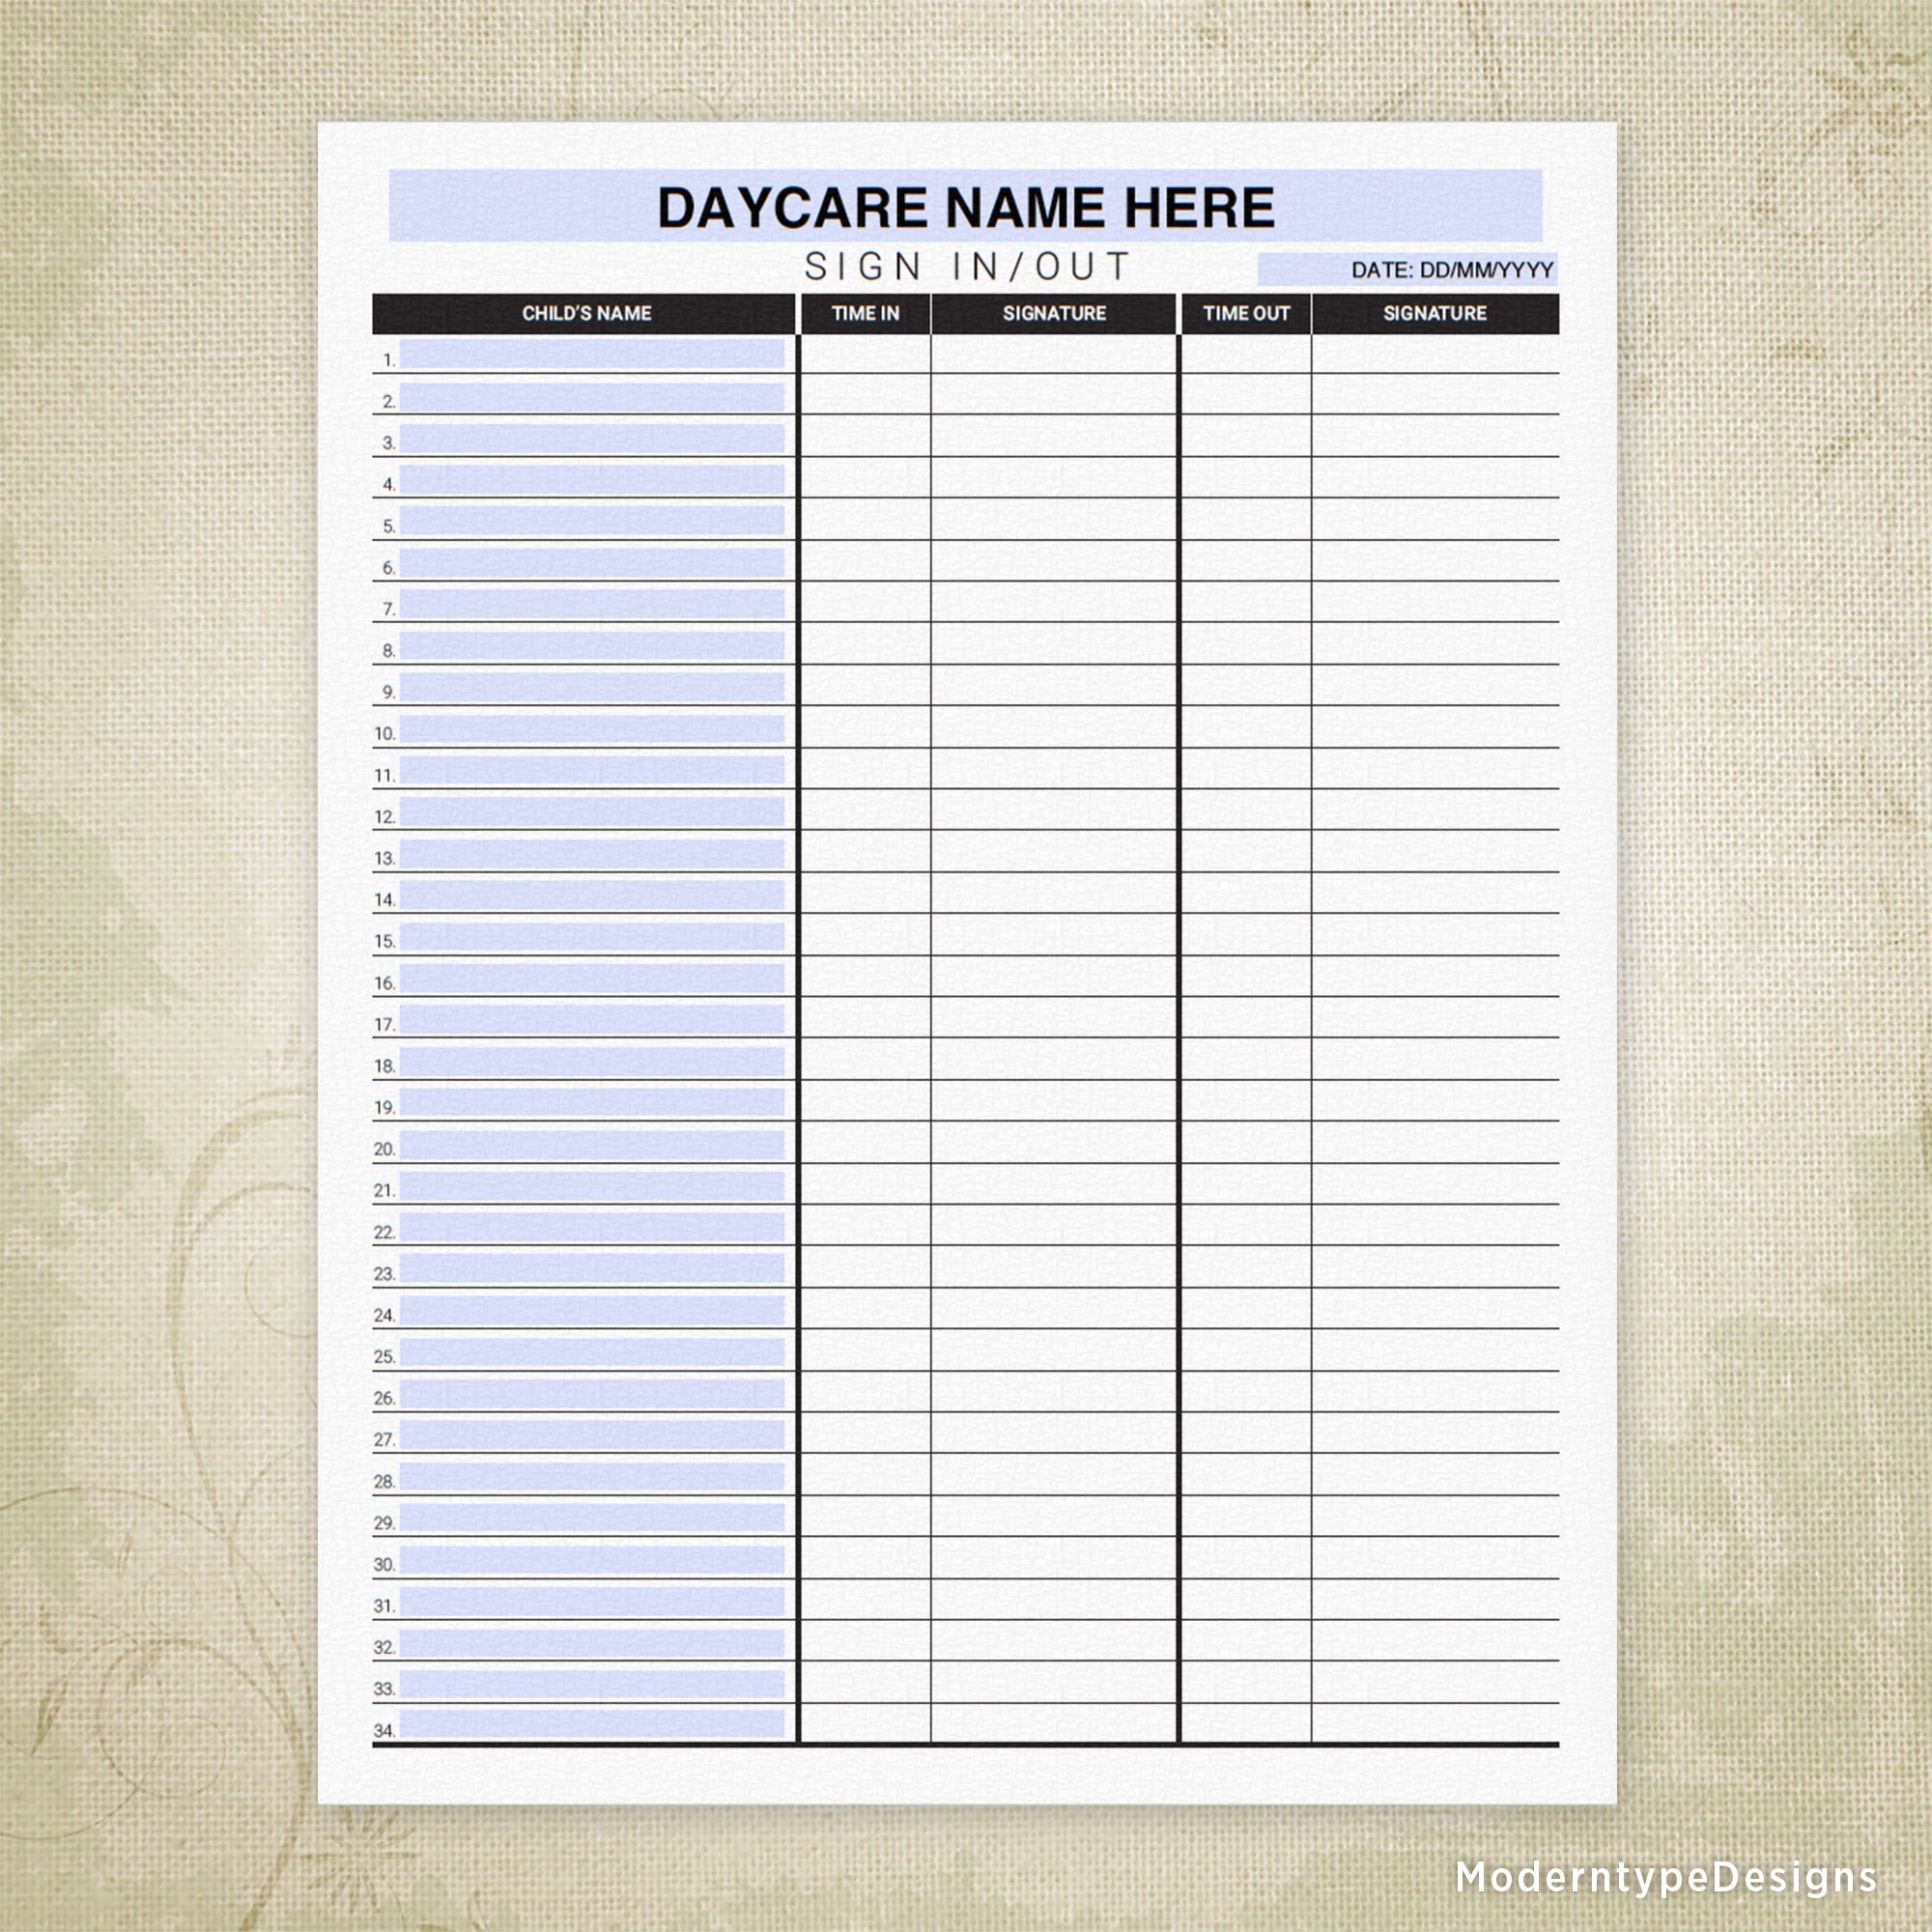 Daycare Sign In and Out Printable Form, Editable